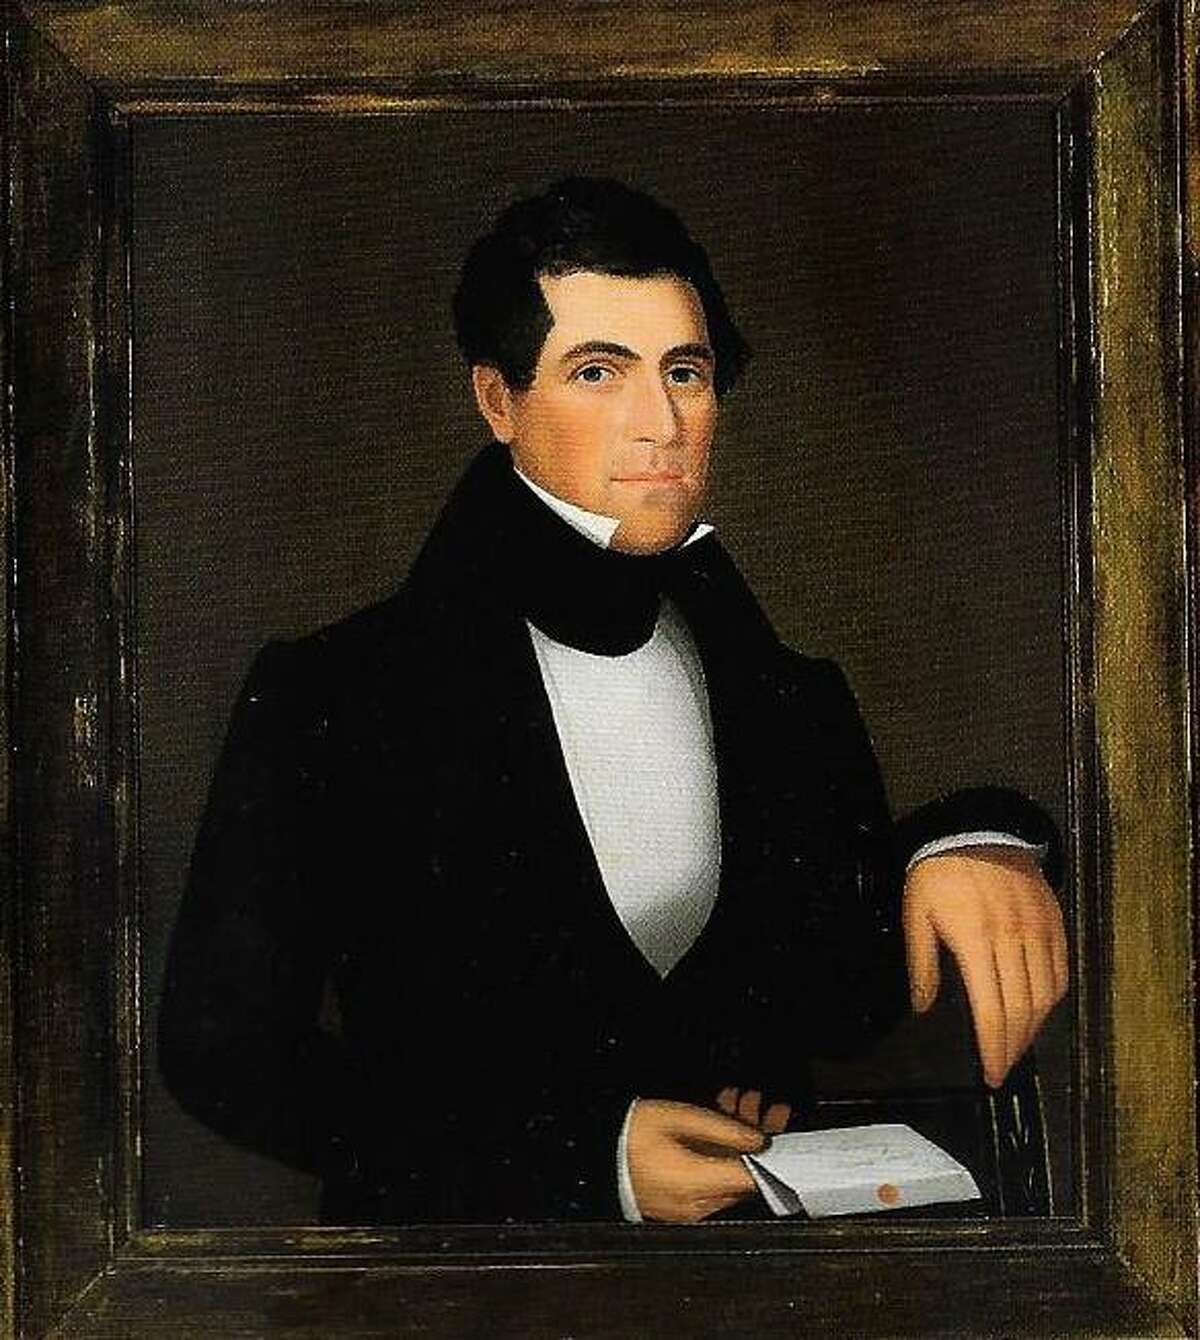 A portrait of Preston Wing, painted by Ammi Phillips.